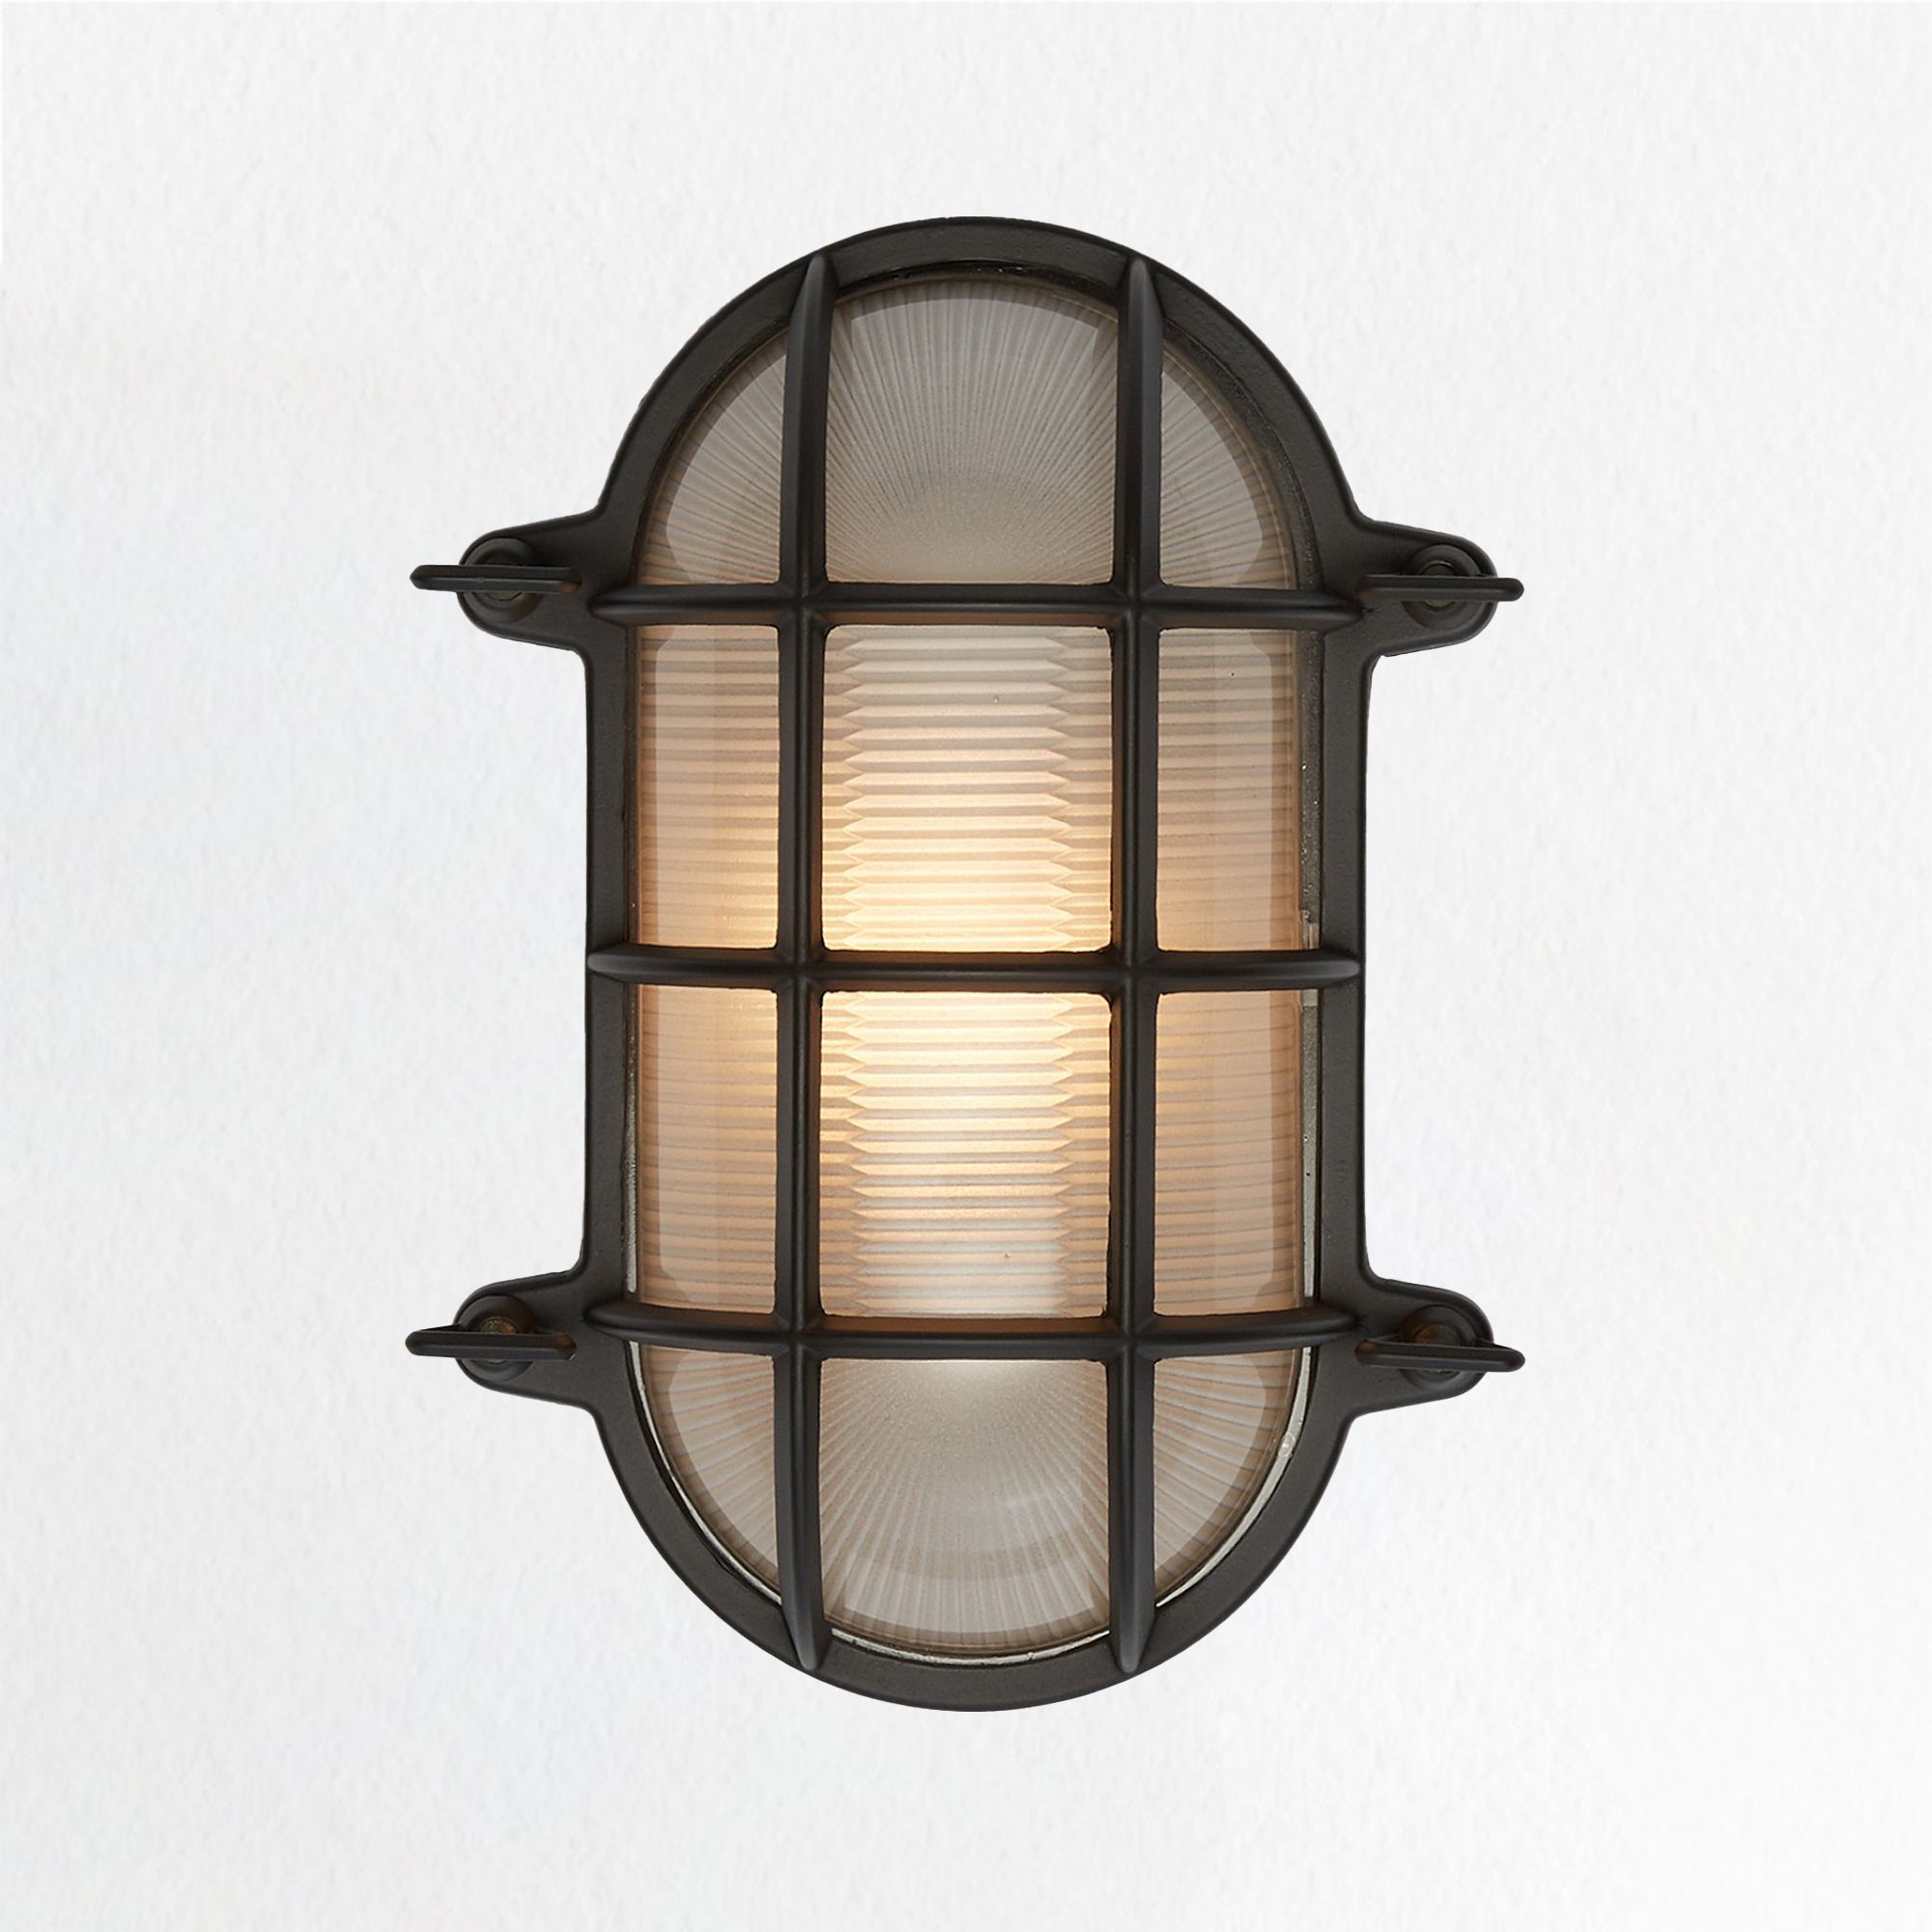 Seabeck Cage Oval Bulkhead Sconce